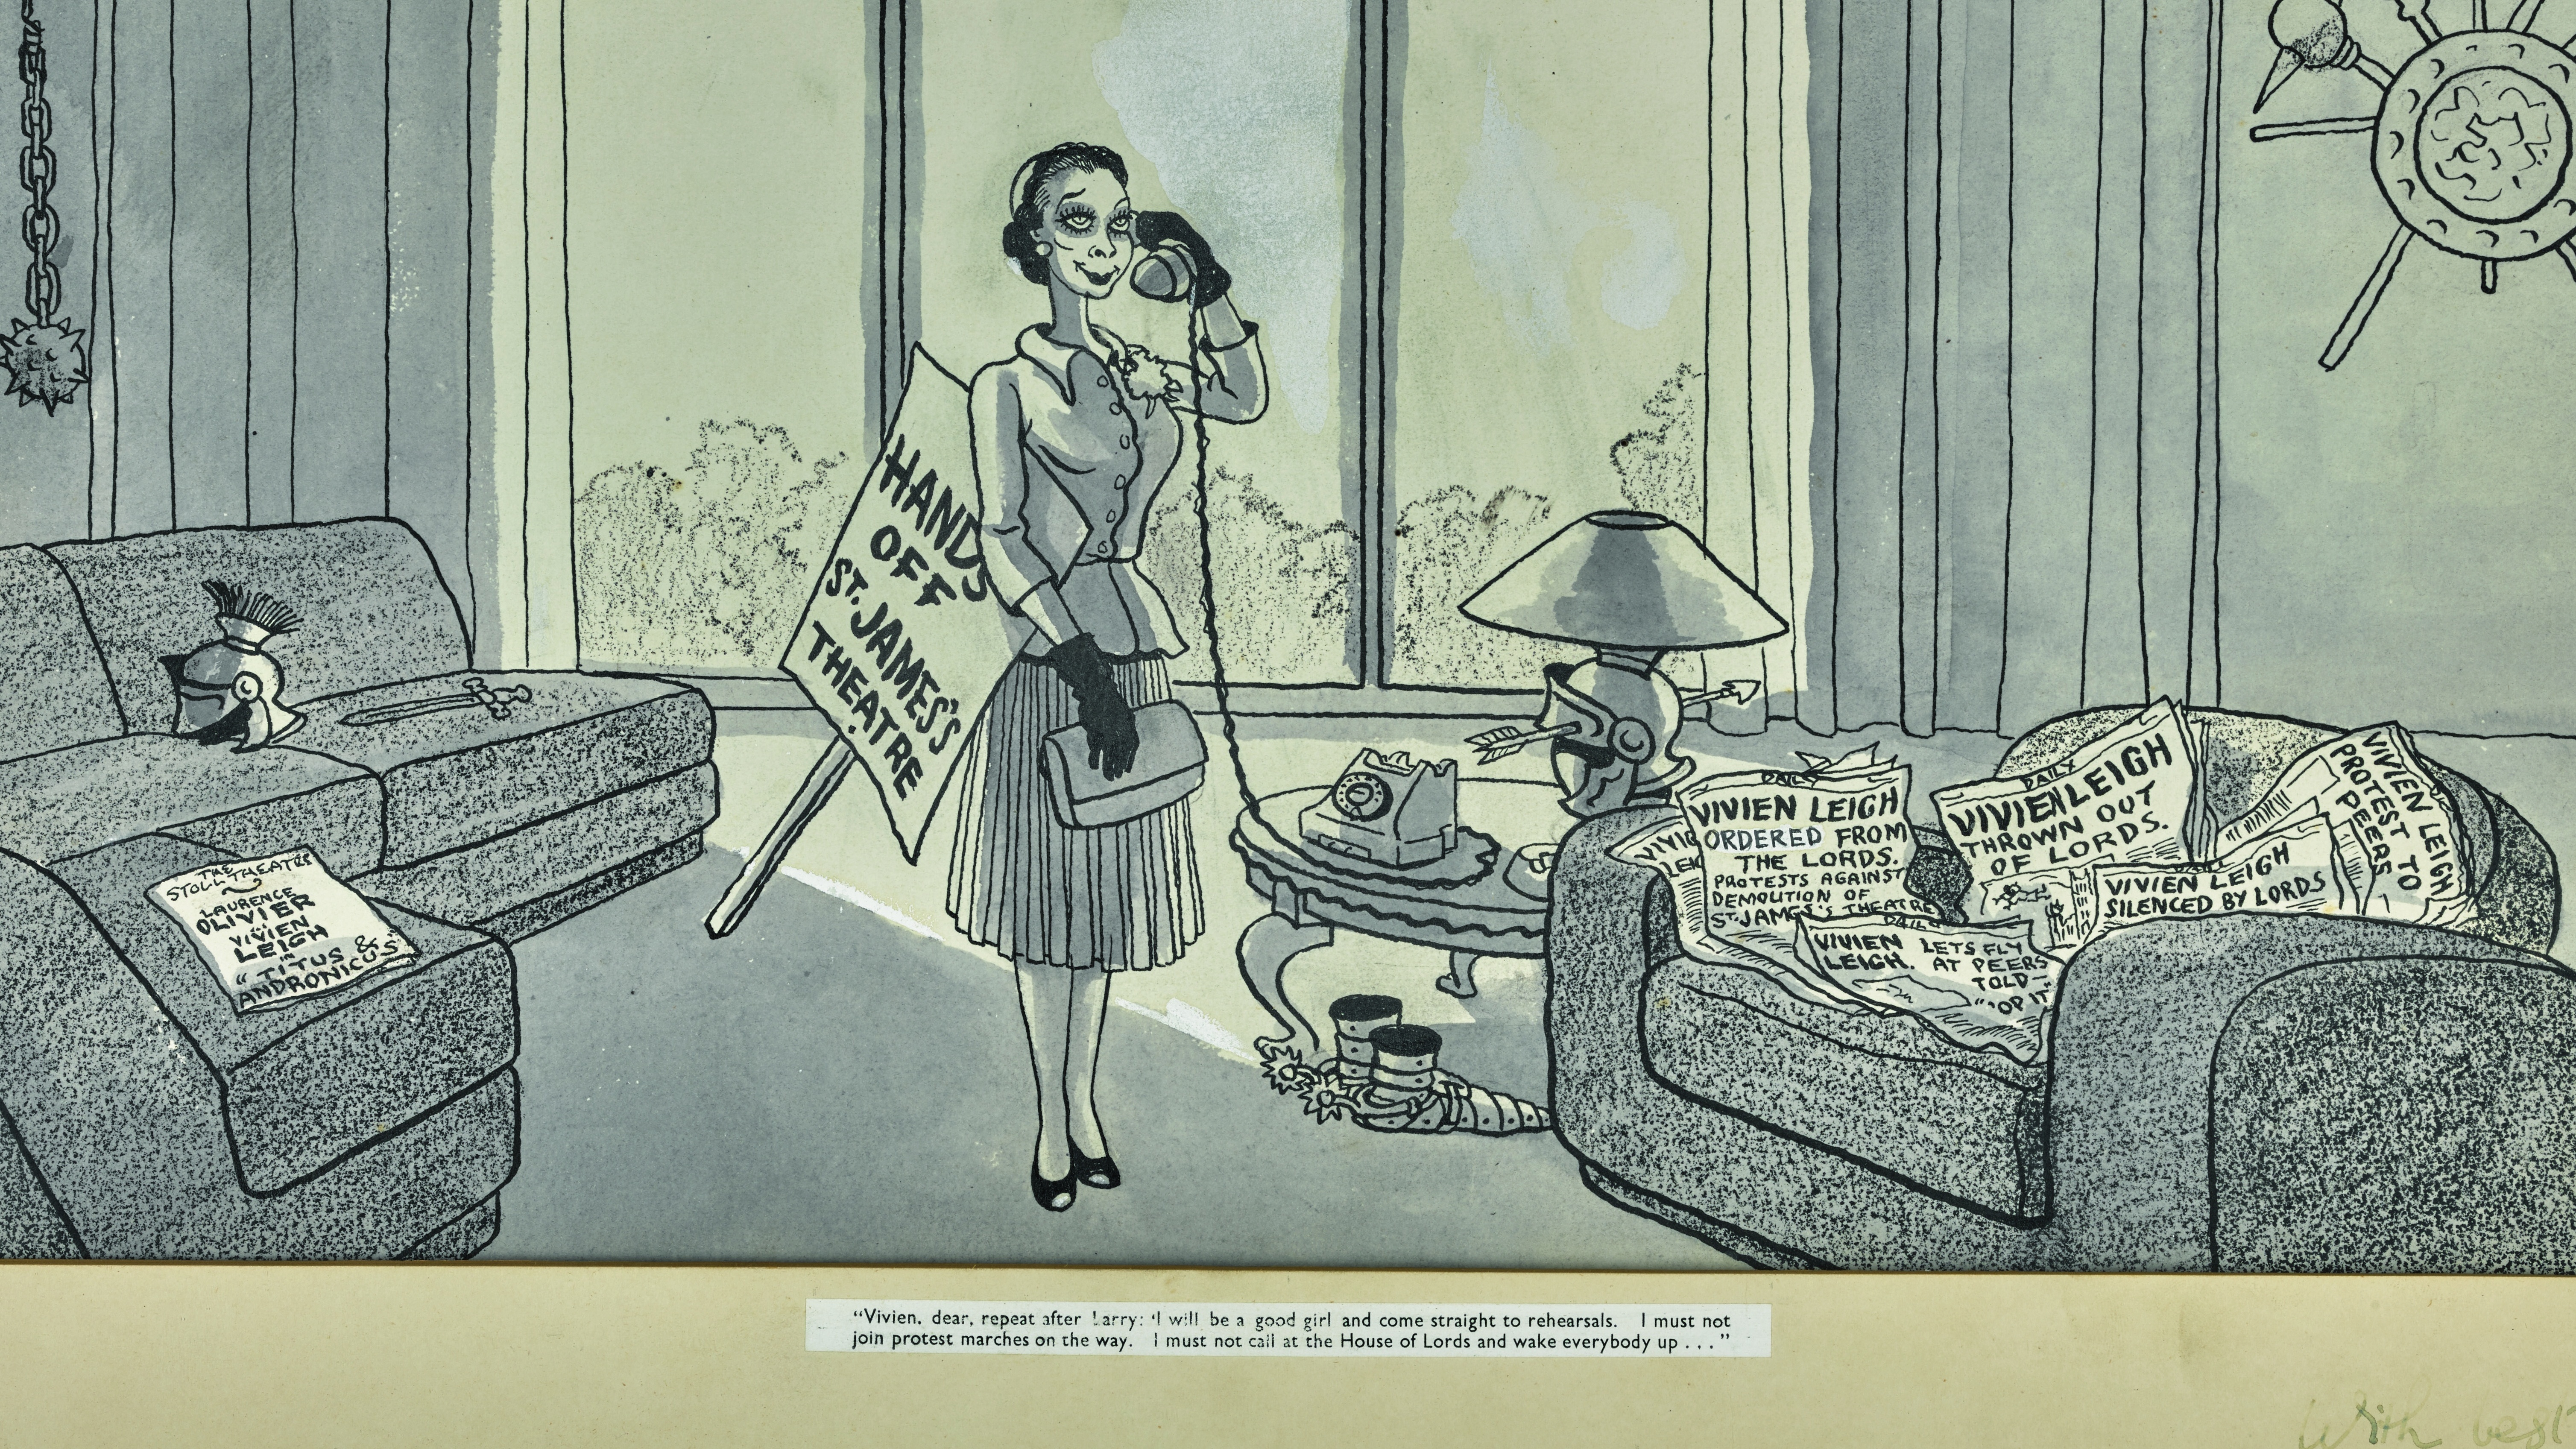 A cartoon parodying Vivien Leigh's protests is up for auction (Sotheby's)